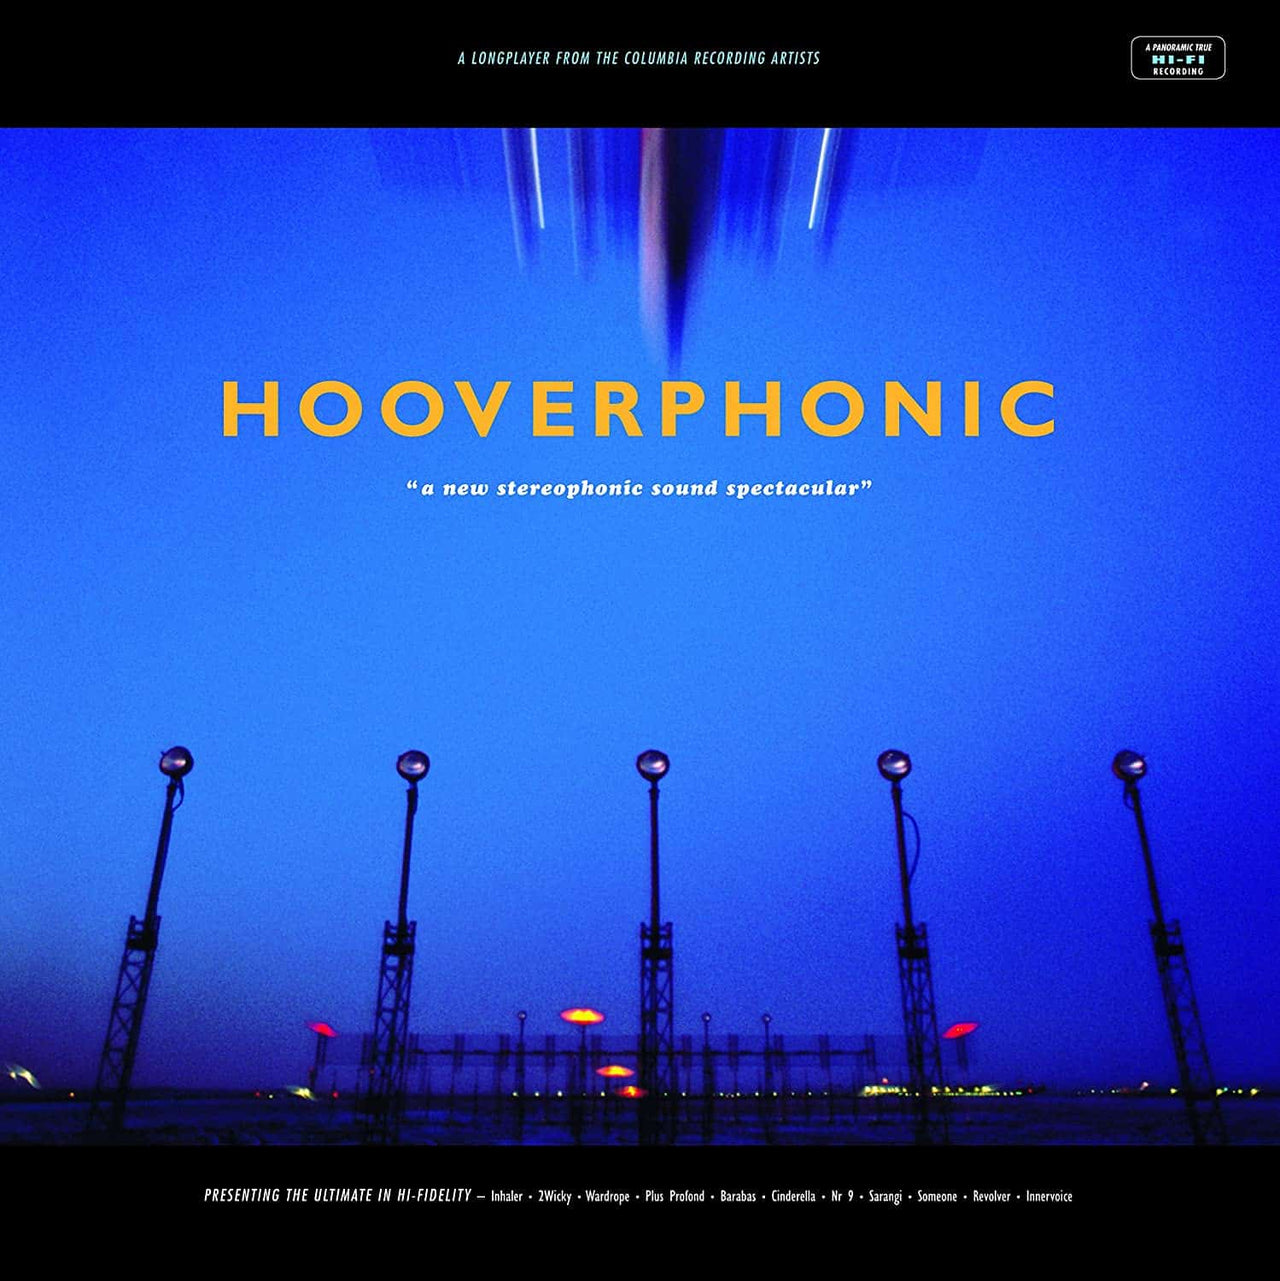 HOOVERPHONIC - A NEW STEREOPHONIC SOUND SPECTACULAR REMIXES (12IN) RSD21